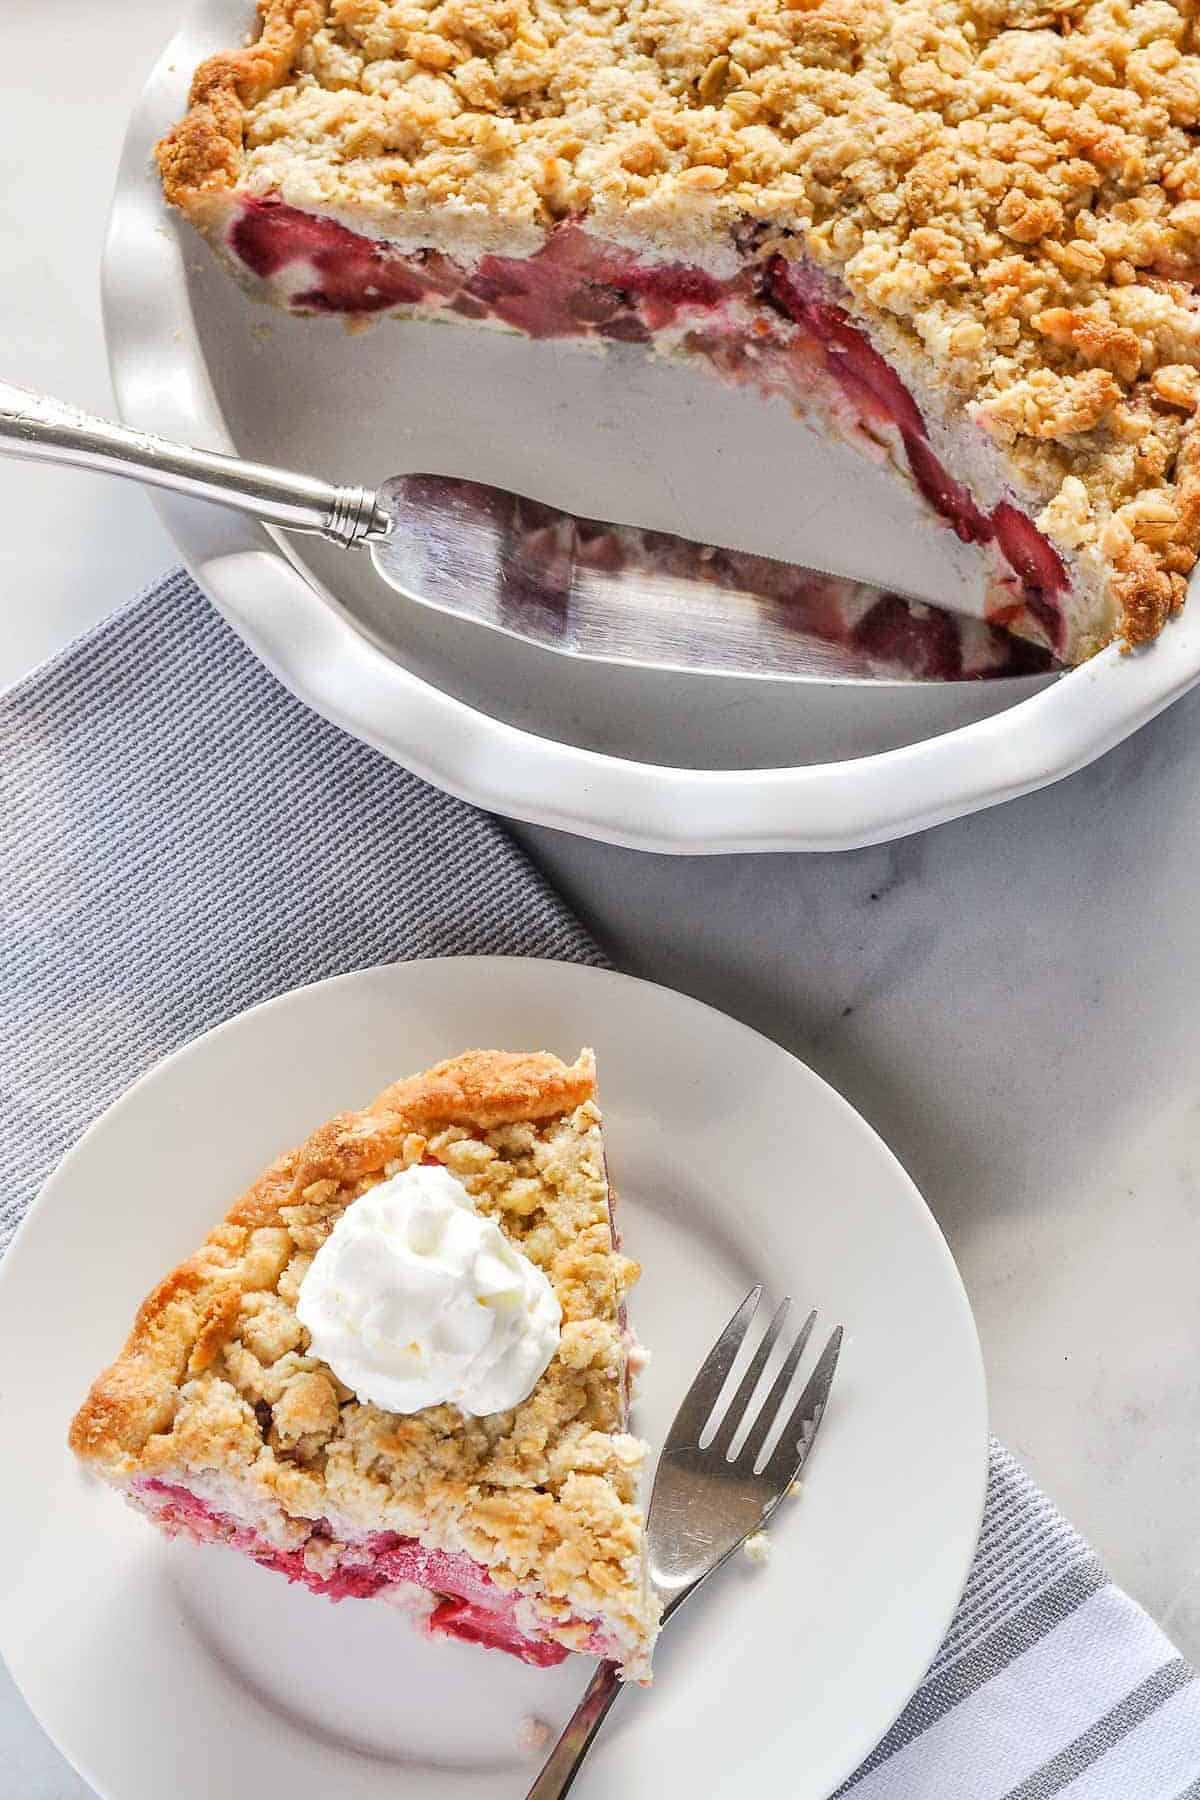 A slice of Strawberry Rhubarb Crumble Pie with a pie plate and the remainder of the pie beside it.